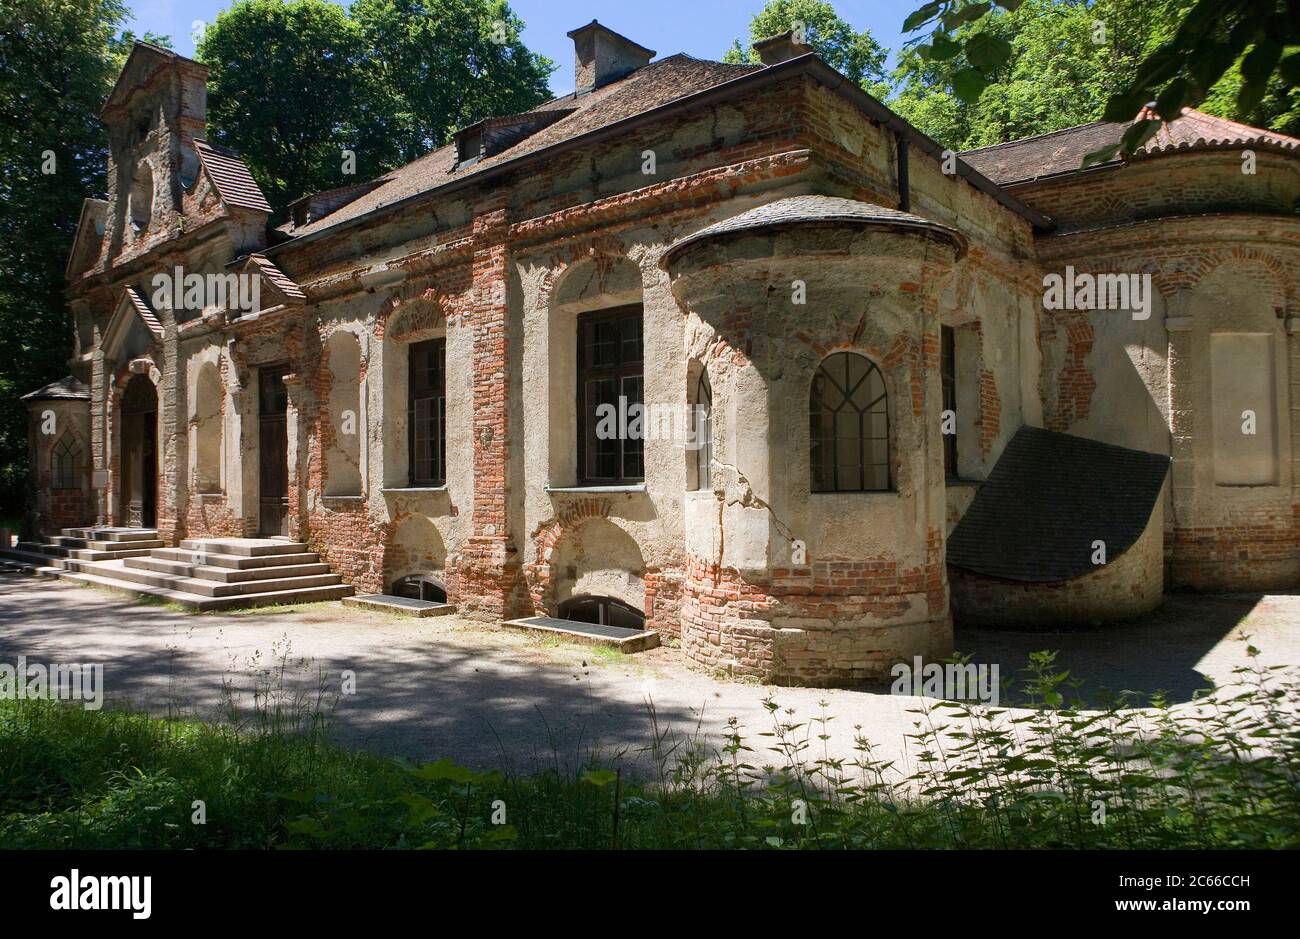 Munich, Magdalenenklause royal hermitage, habitable artificial ruins in Nymphenburg Palace Park, built in 1725 by Josef Effner at behest of Elector Max Emanuel, one of the first imitation ruins in European landscape architecture, interior designed as grottos Stock Photo